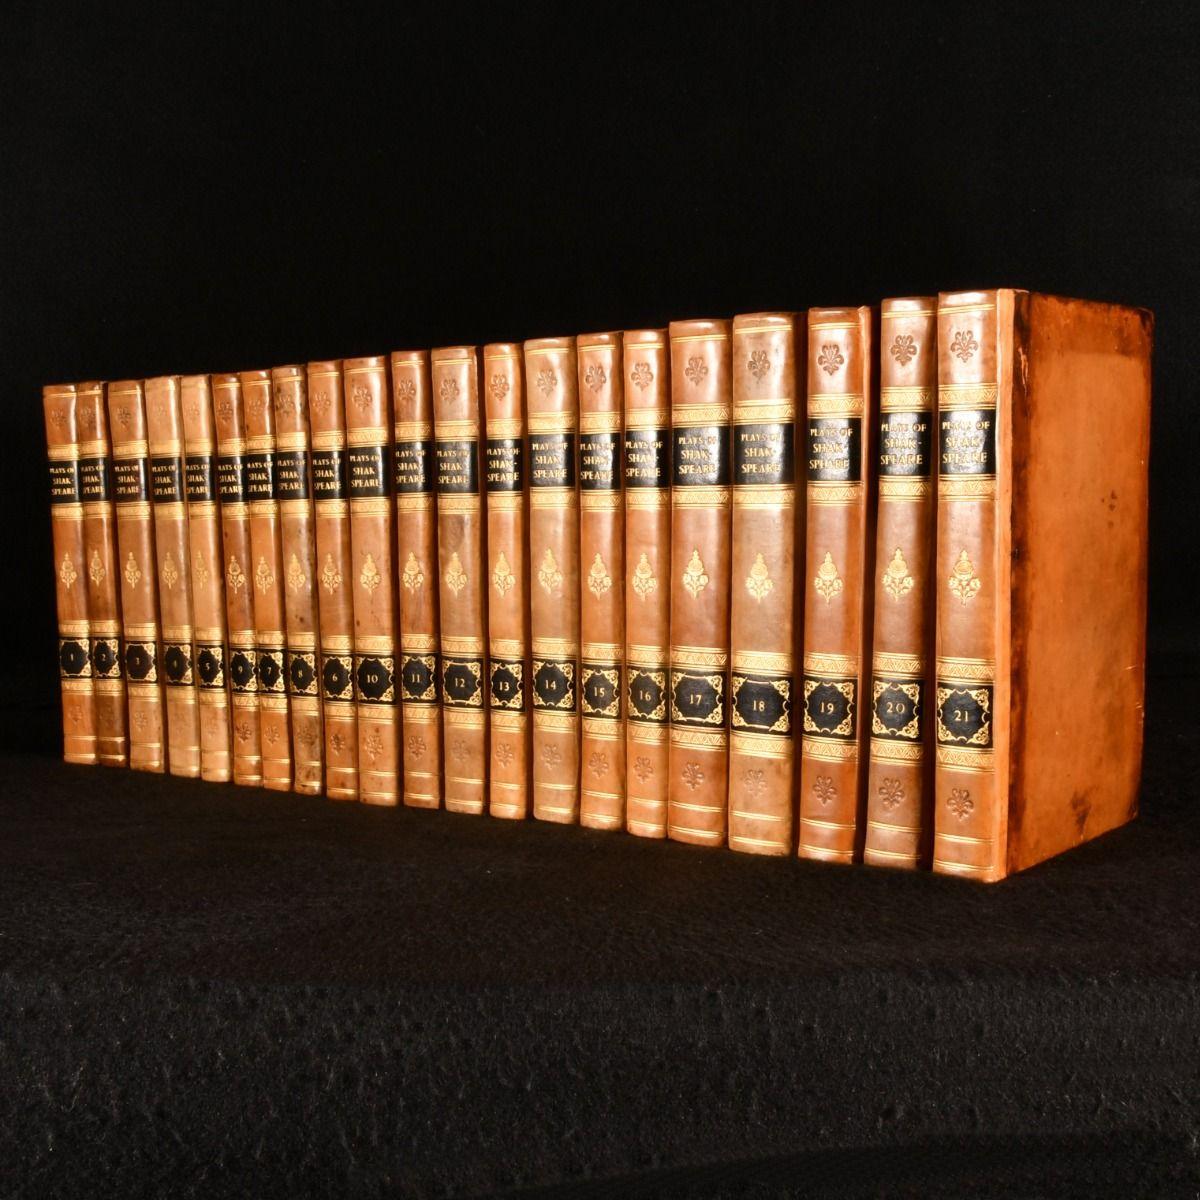 An exceptionally bright example of the scarce 1813 twenty-one volume set of the plays of Shakespeare, supplemented with a wealth of comments and critical notices.

The very scarce complete 1813 twenty-one volume edition of the plays of Shakespeare.